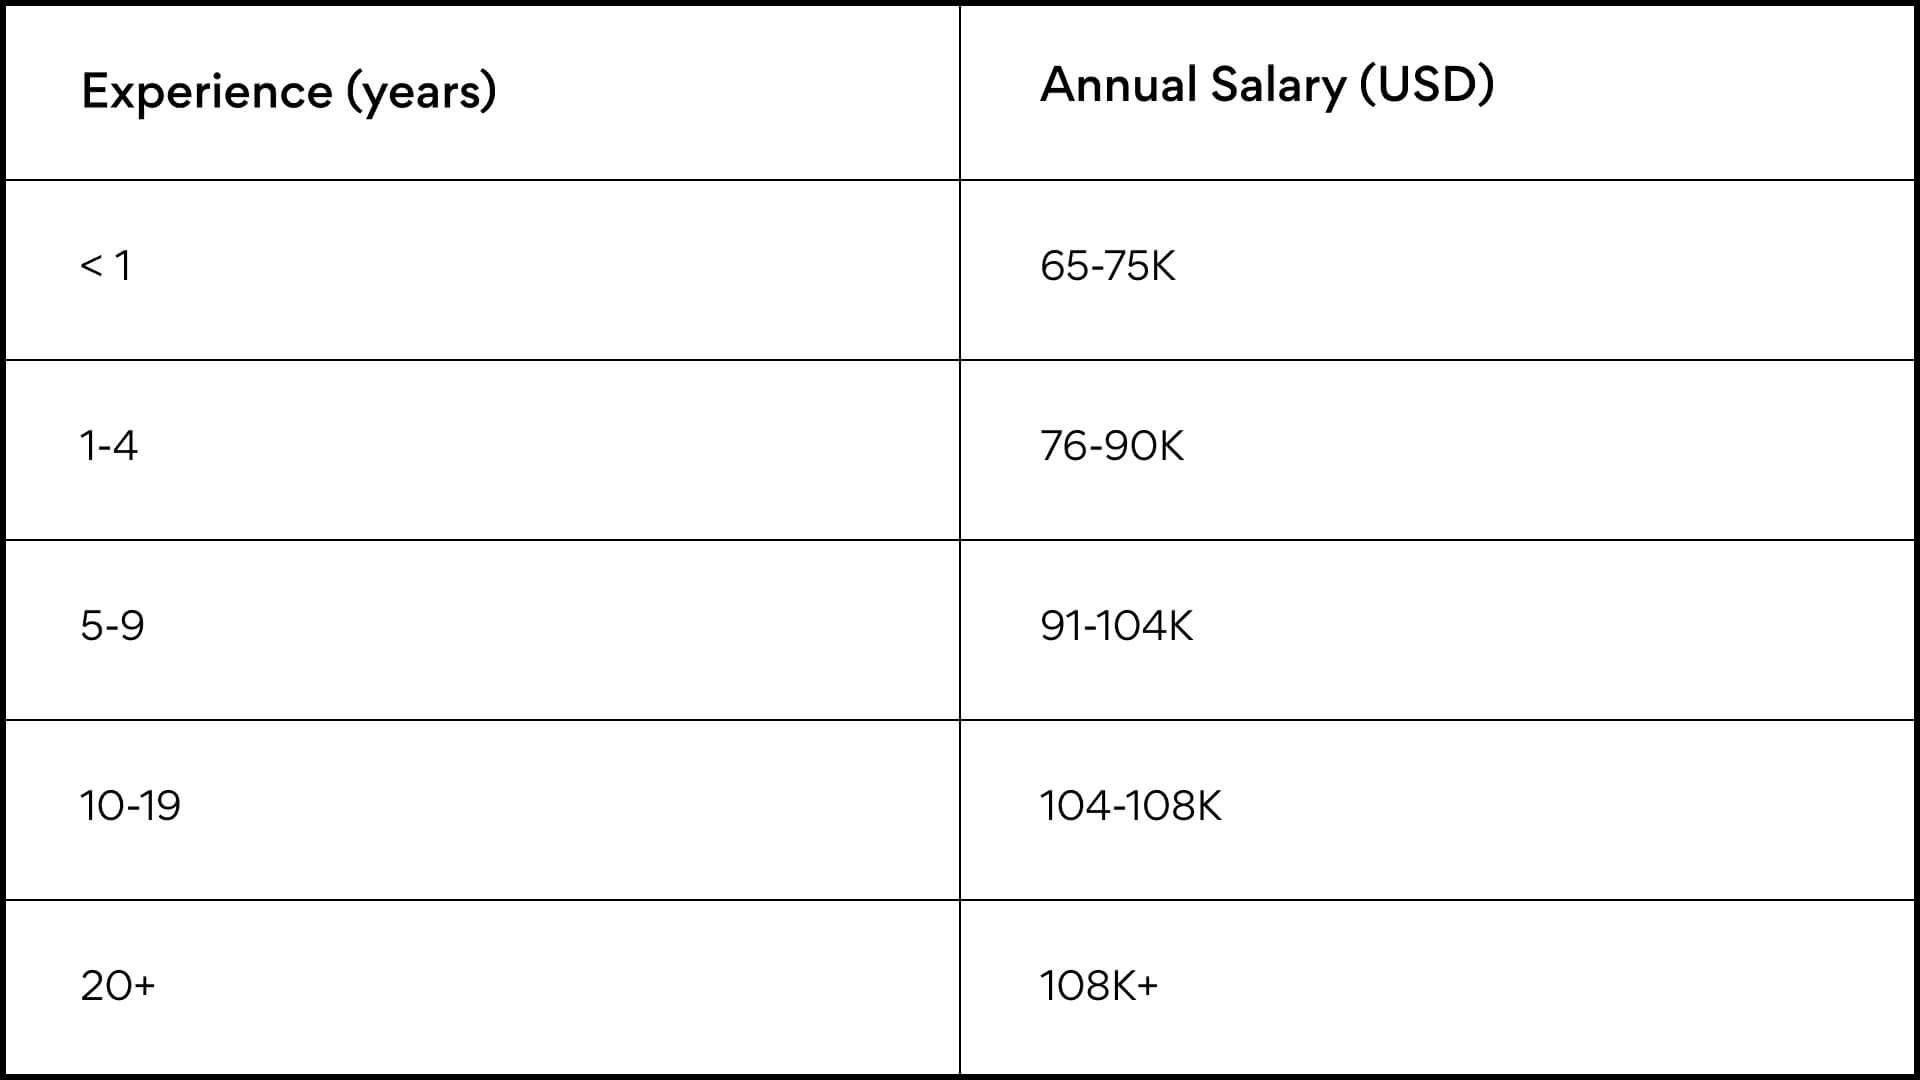 product owner's salary based on experience level